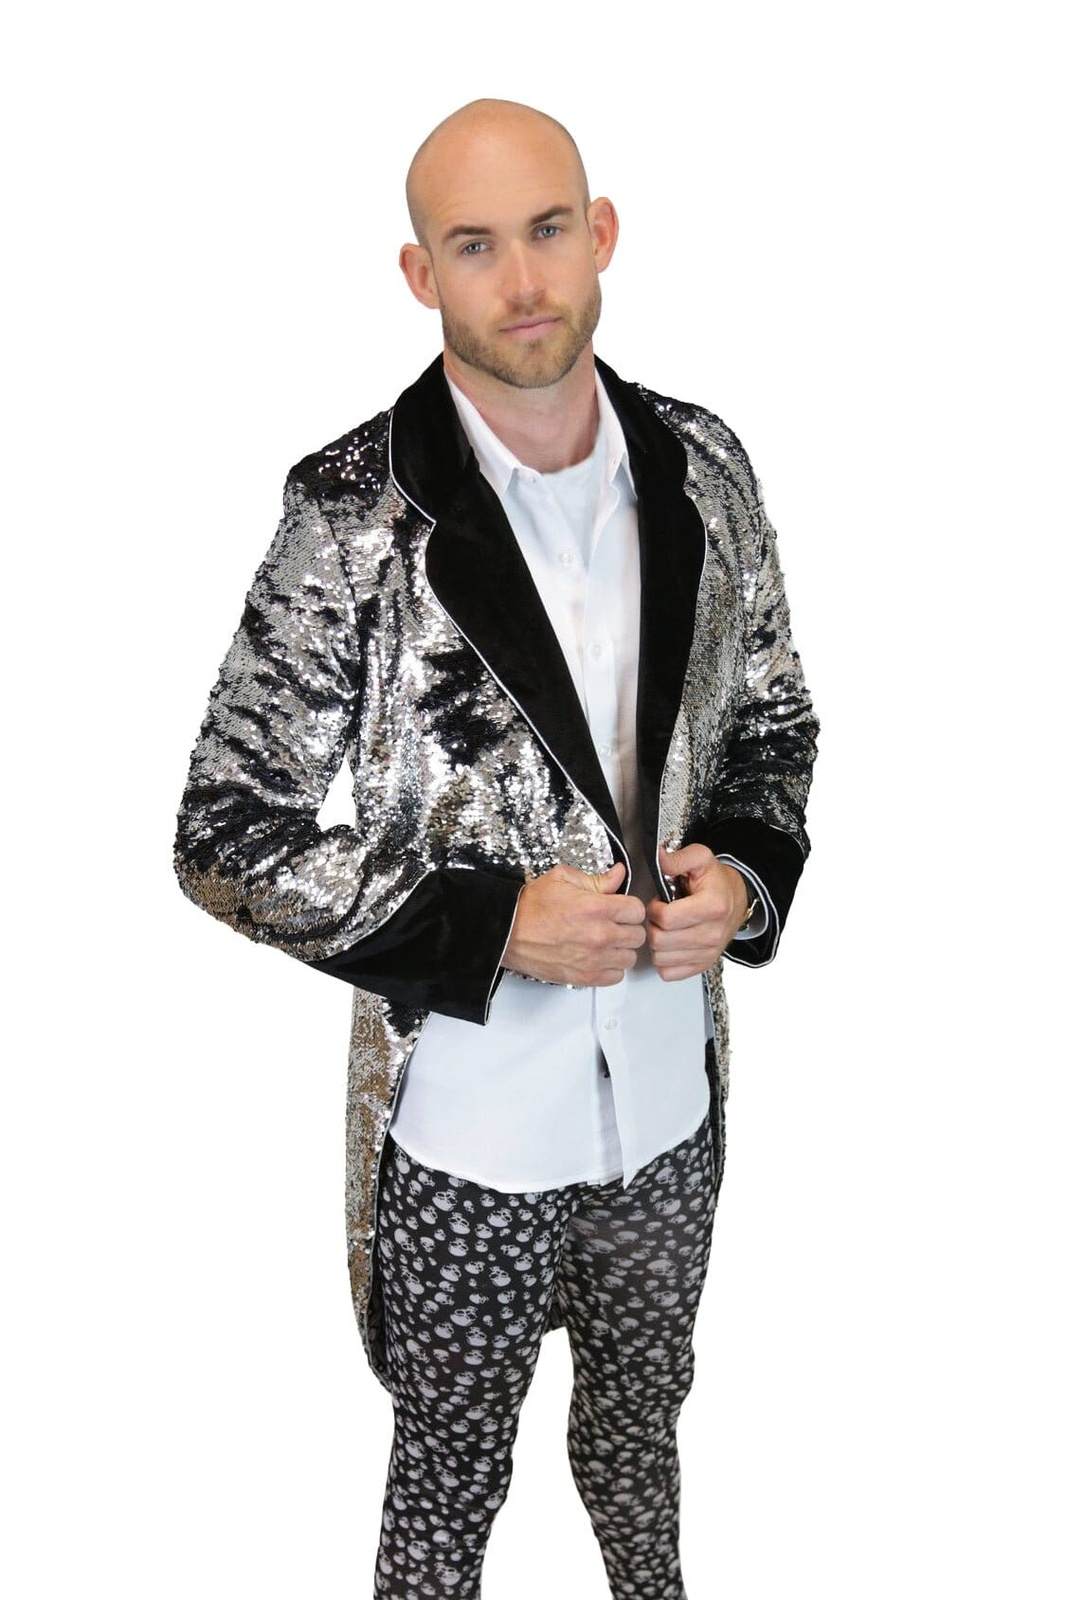 Mens Black and Silver Tuxedo Tailcoat from Love Khaos Festival Clothing brand.